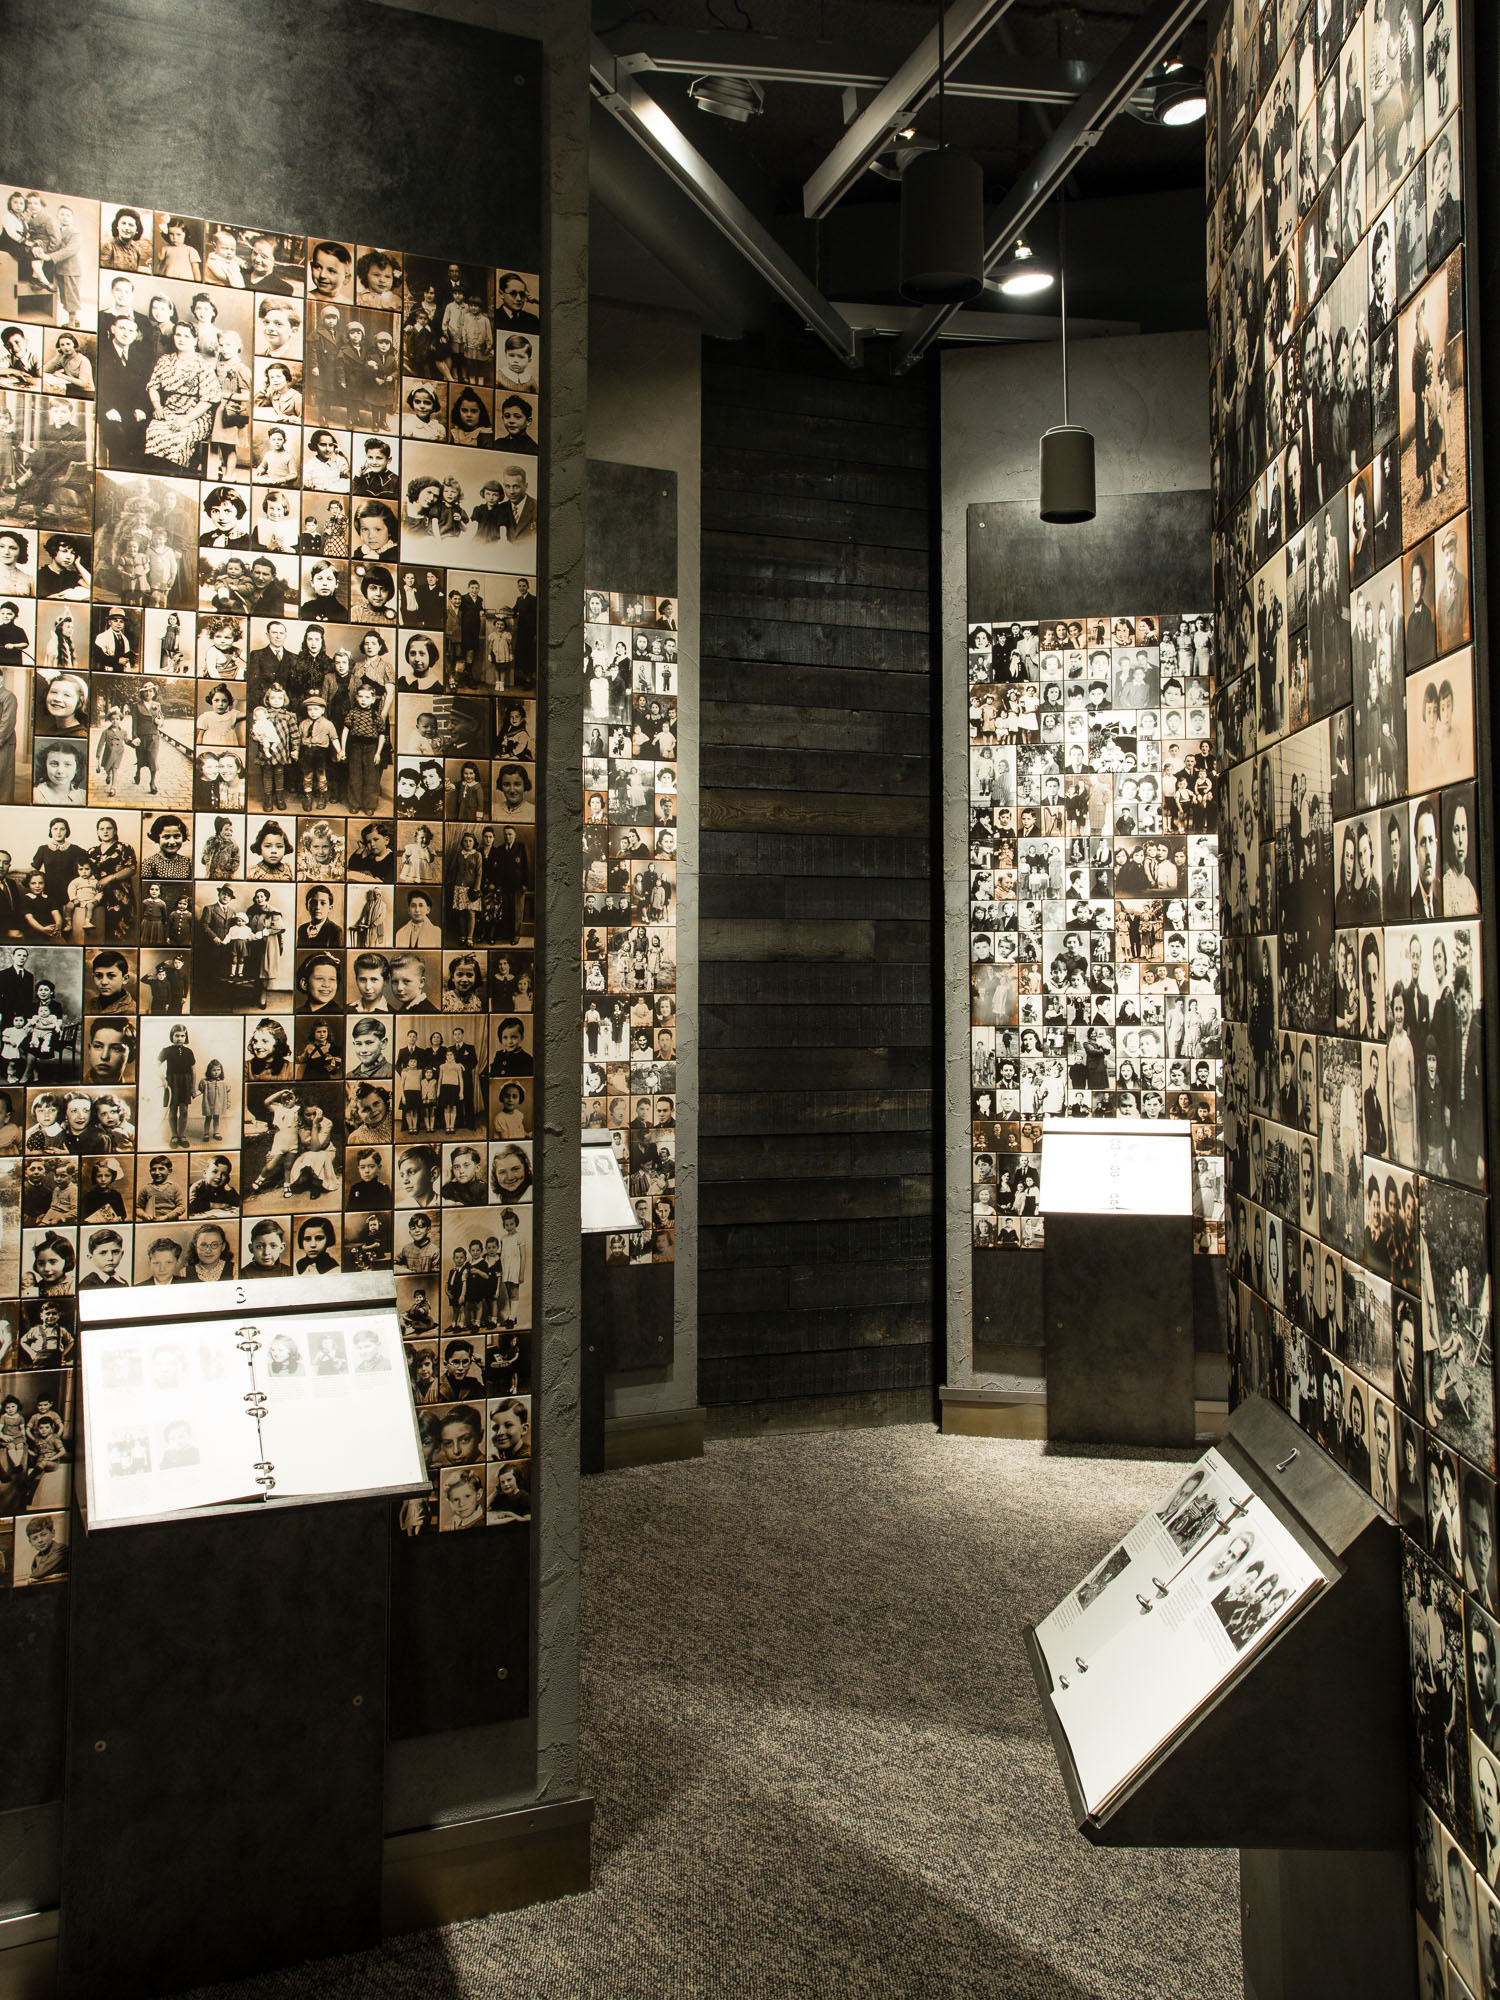 Walls of photographs in the Museum of Jewish Heritage